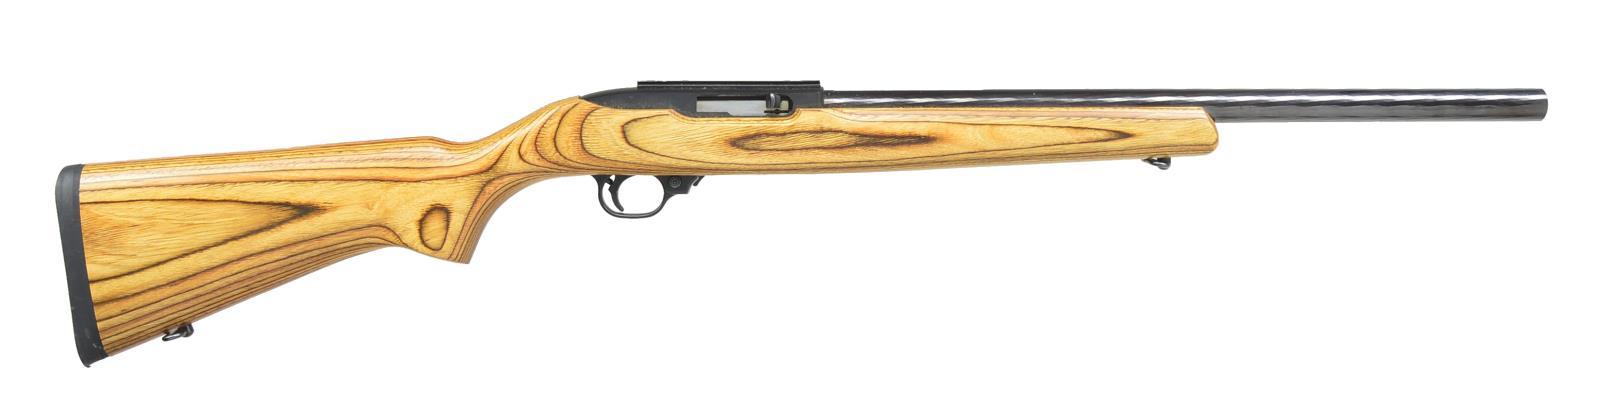 RUGER MODEL10/22 TARGET SEMI-AUTO RIFLE.